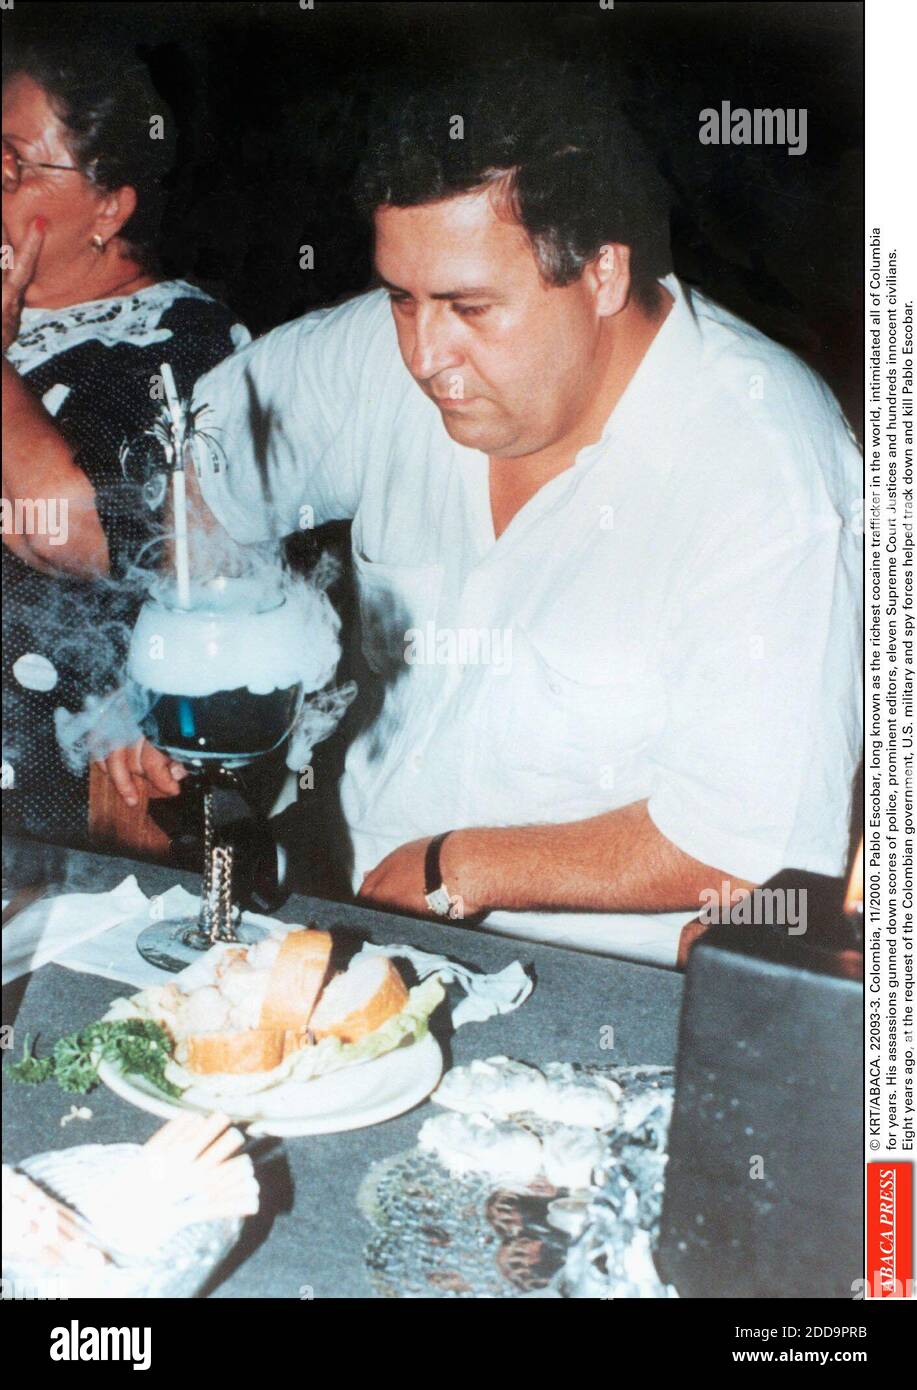 NO FILM, NO VIDEO, NO TV, NO DOCUMENTARY - © KRT/ABACA. 22093-3. Colombia,  11/2000. Pablo Escobar, long known as the richest cocaine trafficker in the  world, intimidated all of Columbia for years.